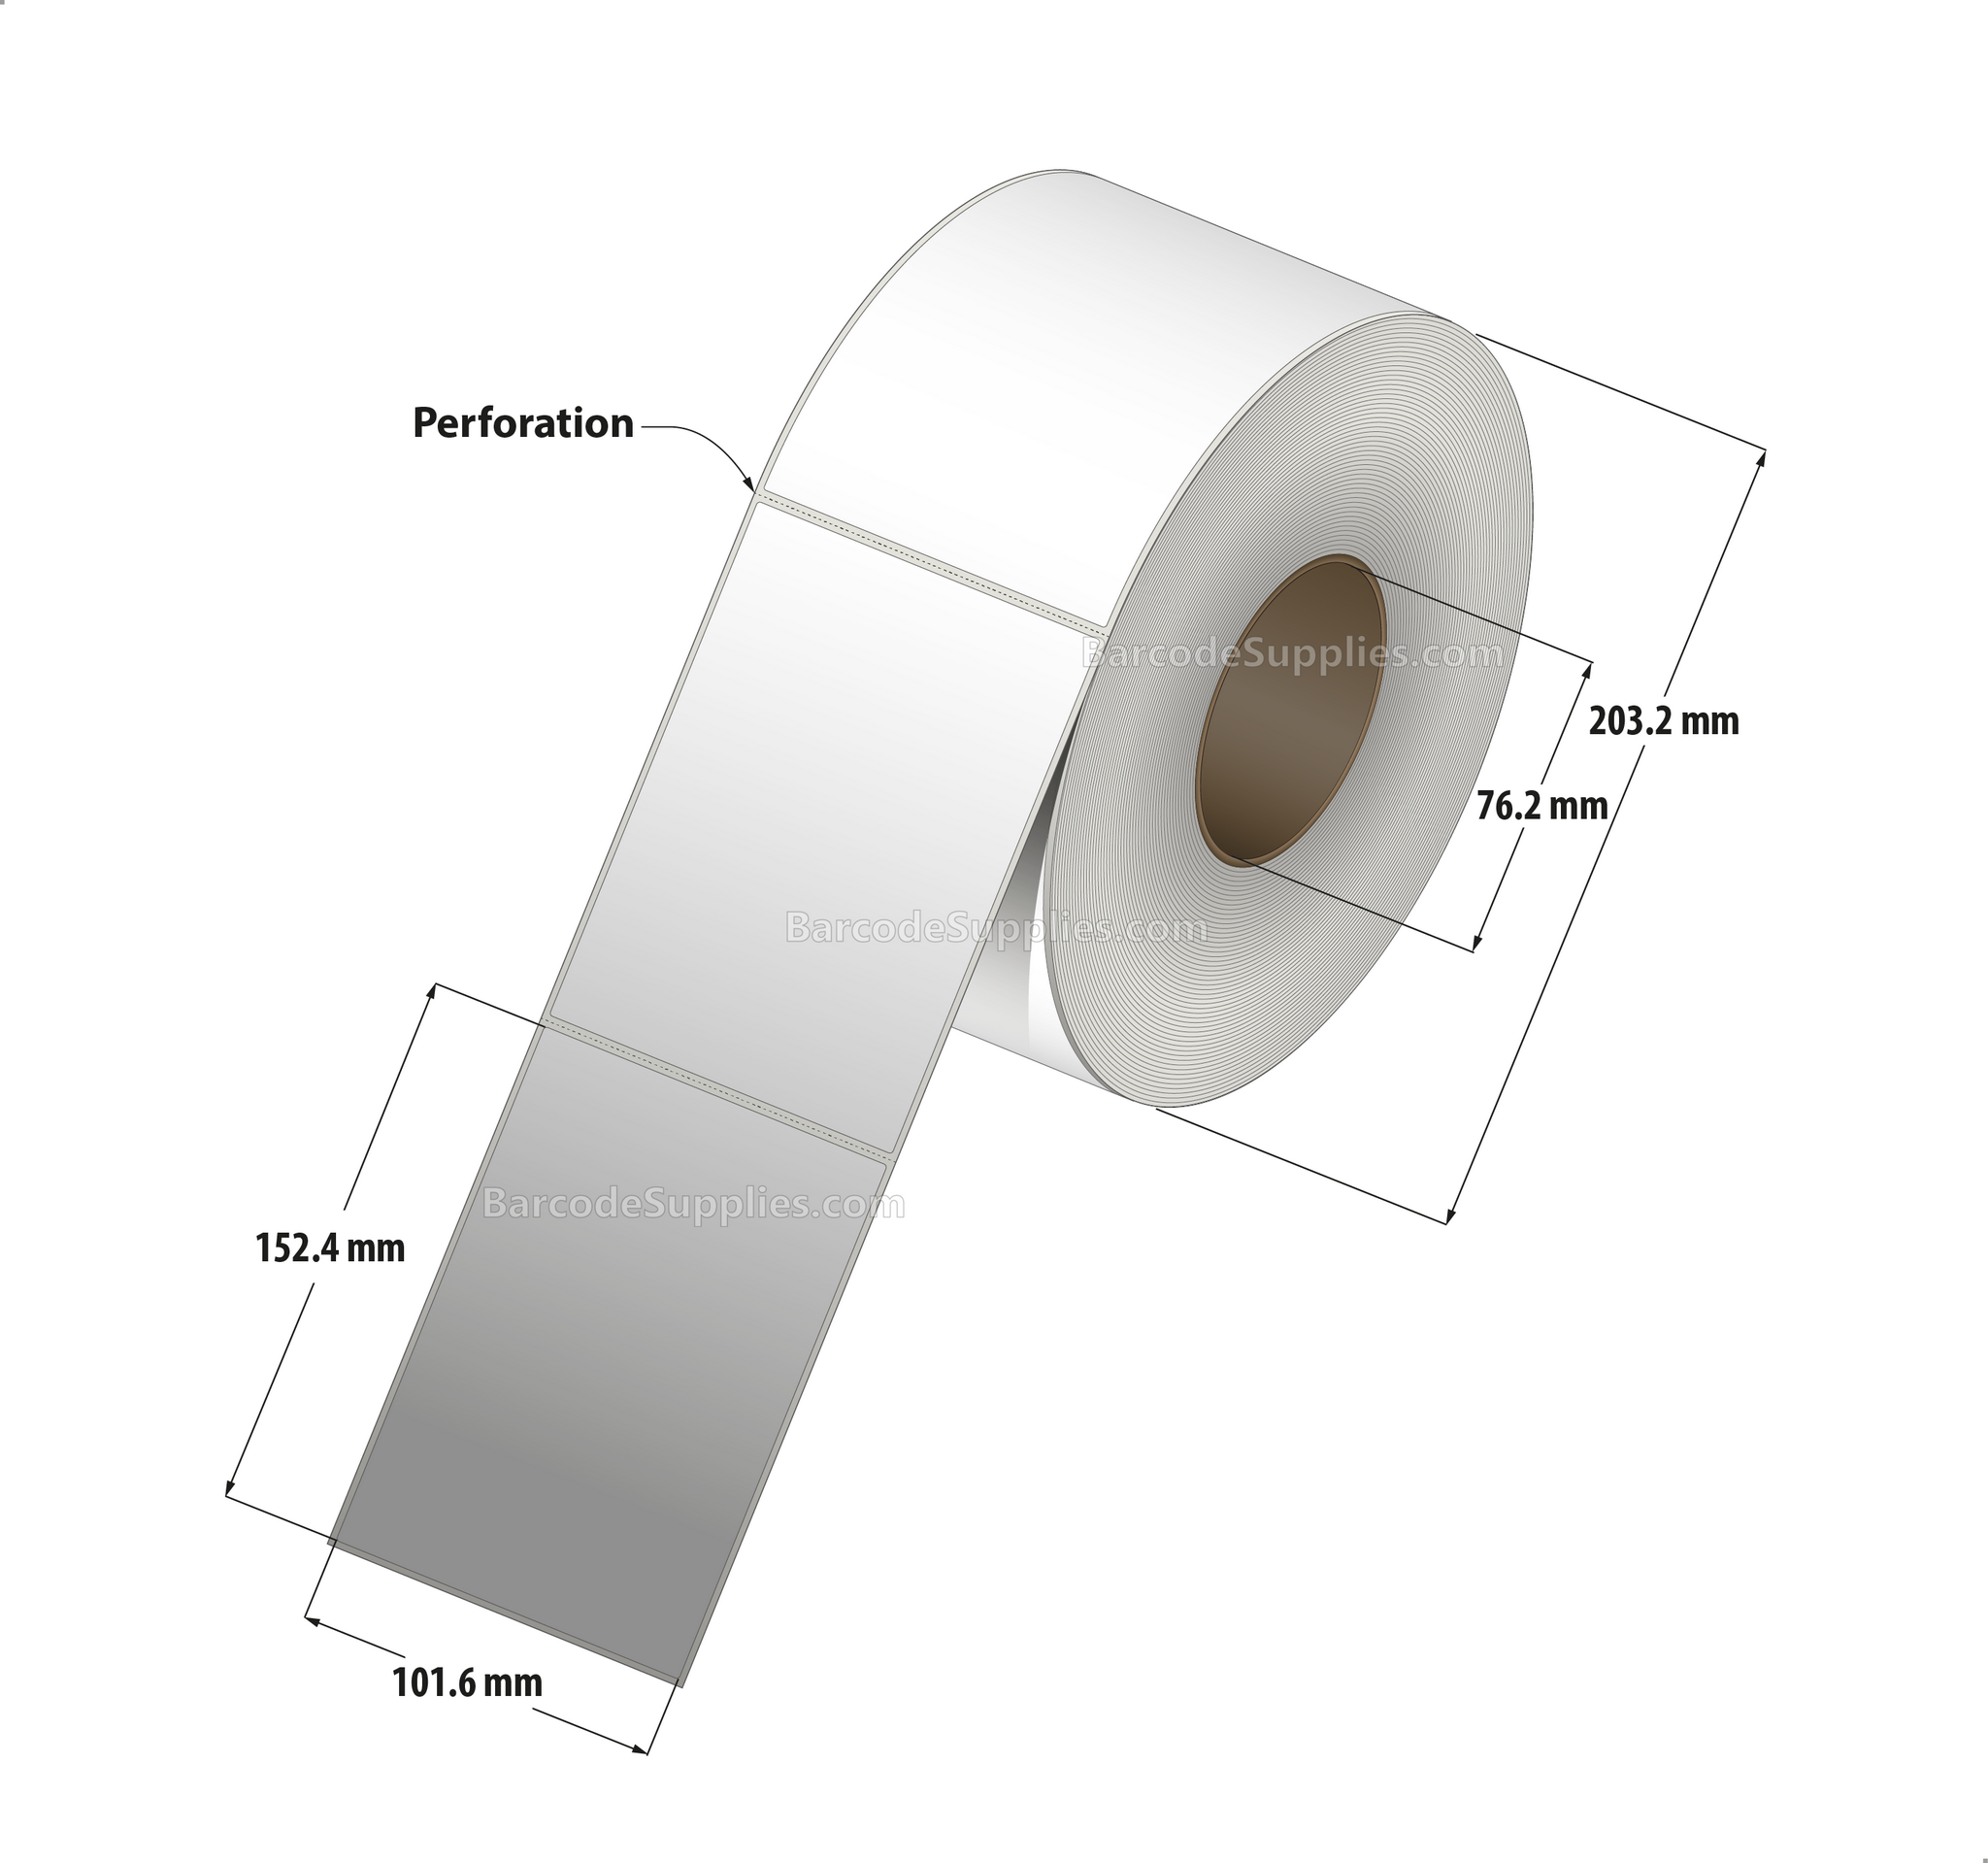 4 x 6 Thermal Transfer White Labels With Removable Adhesive - Perforated - 1000 Labels Per Roll - Carton Of 4 Rolls - 4000 Labels Total - MPN: TH46-1PREM